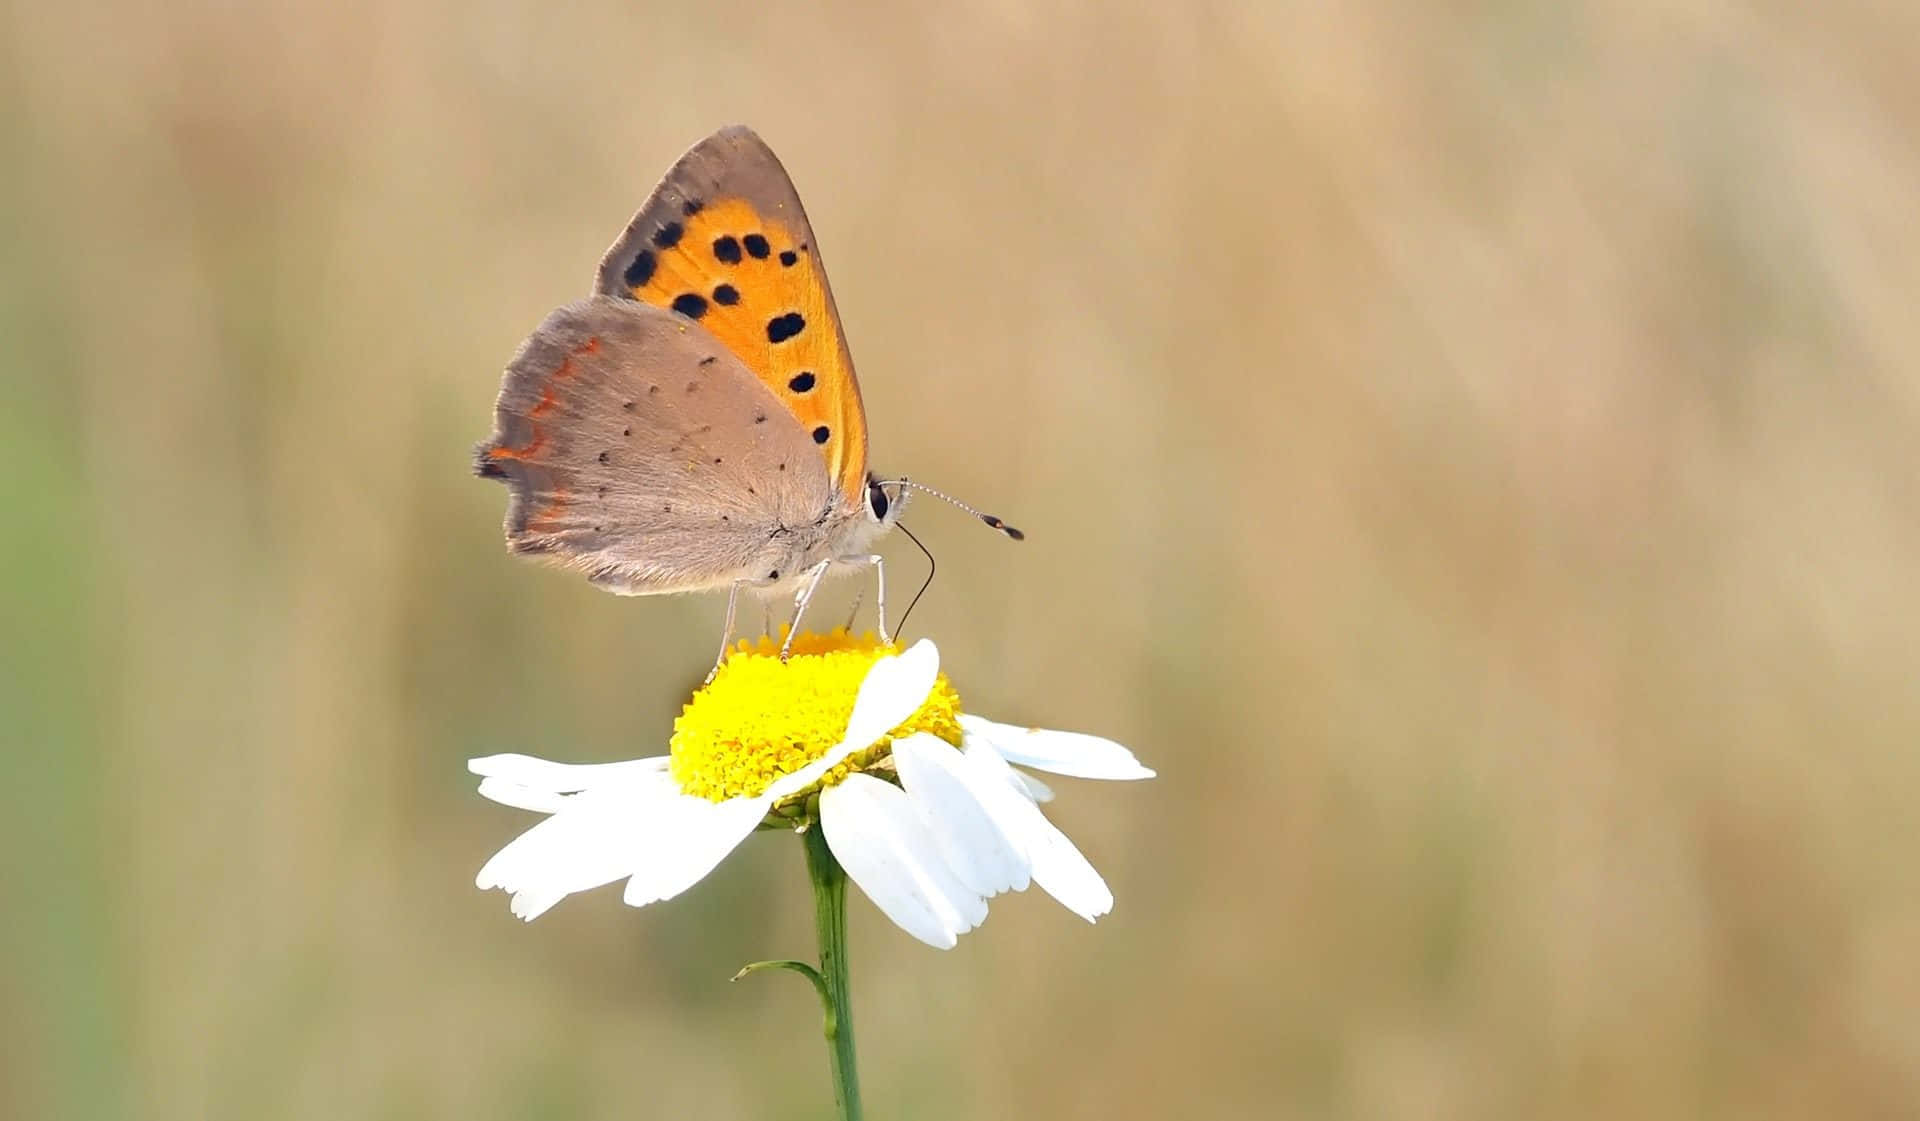 Stunning Yellow Butterfly Perched on Flowers Wallpaper